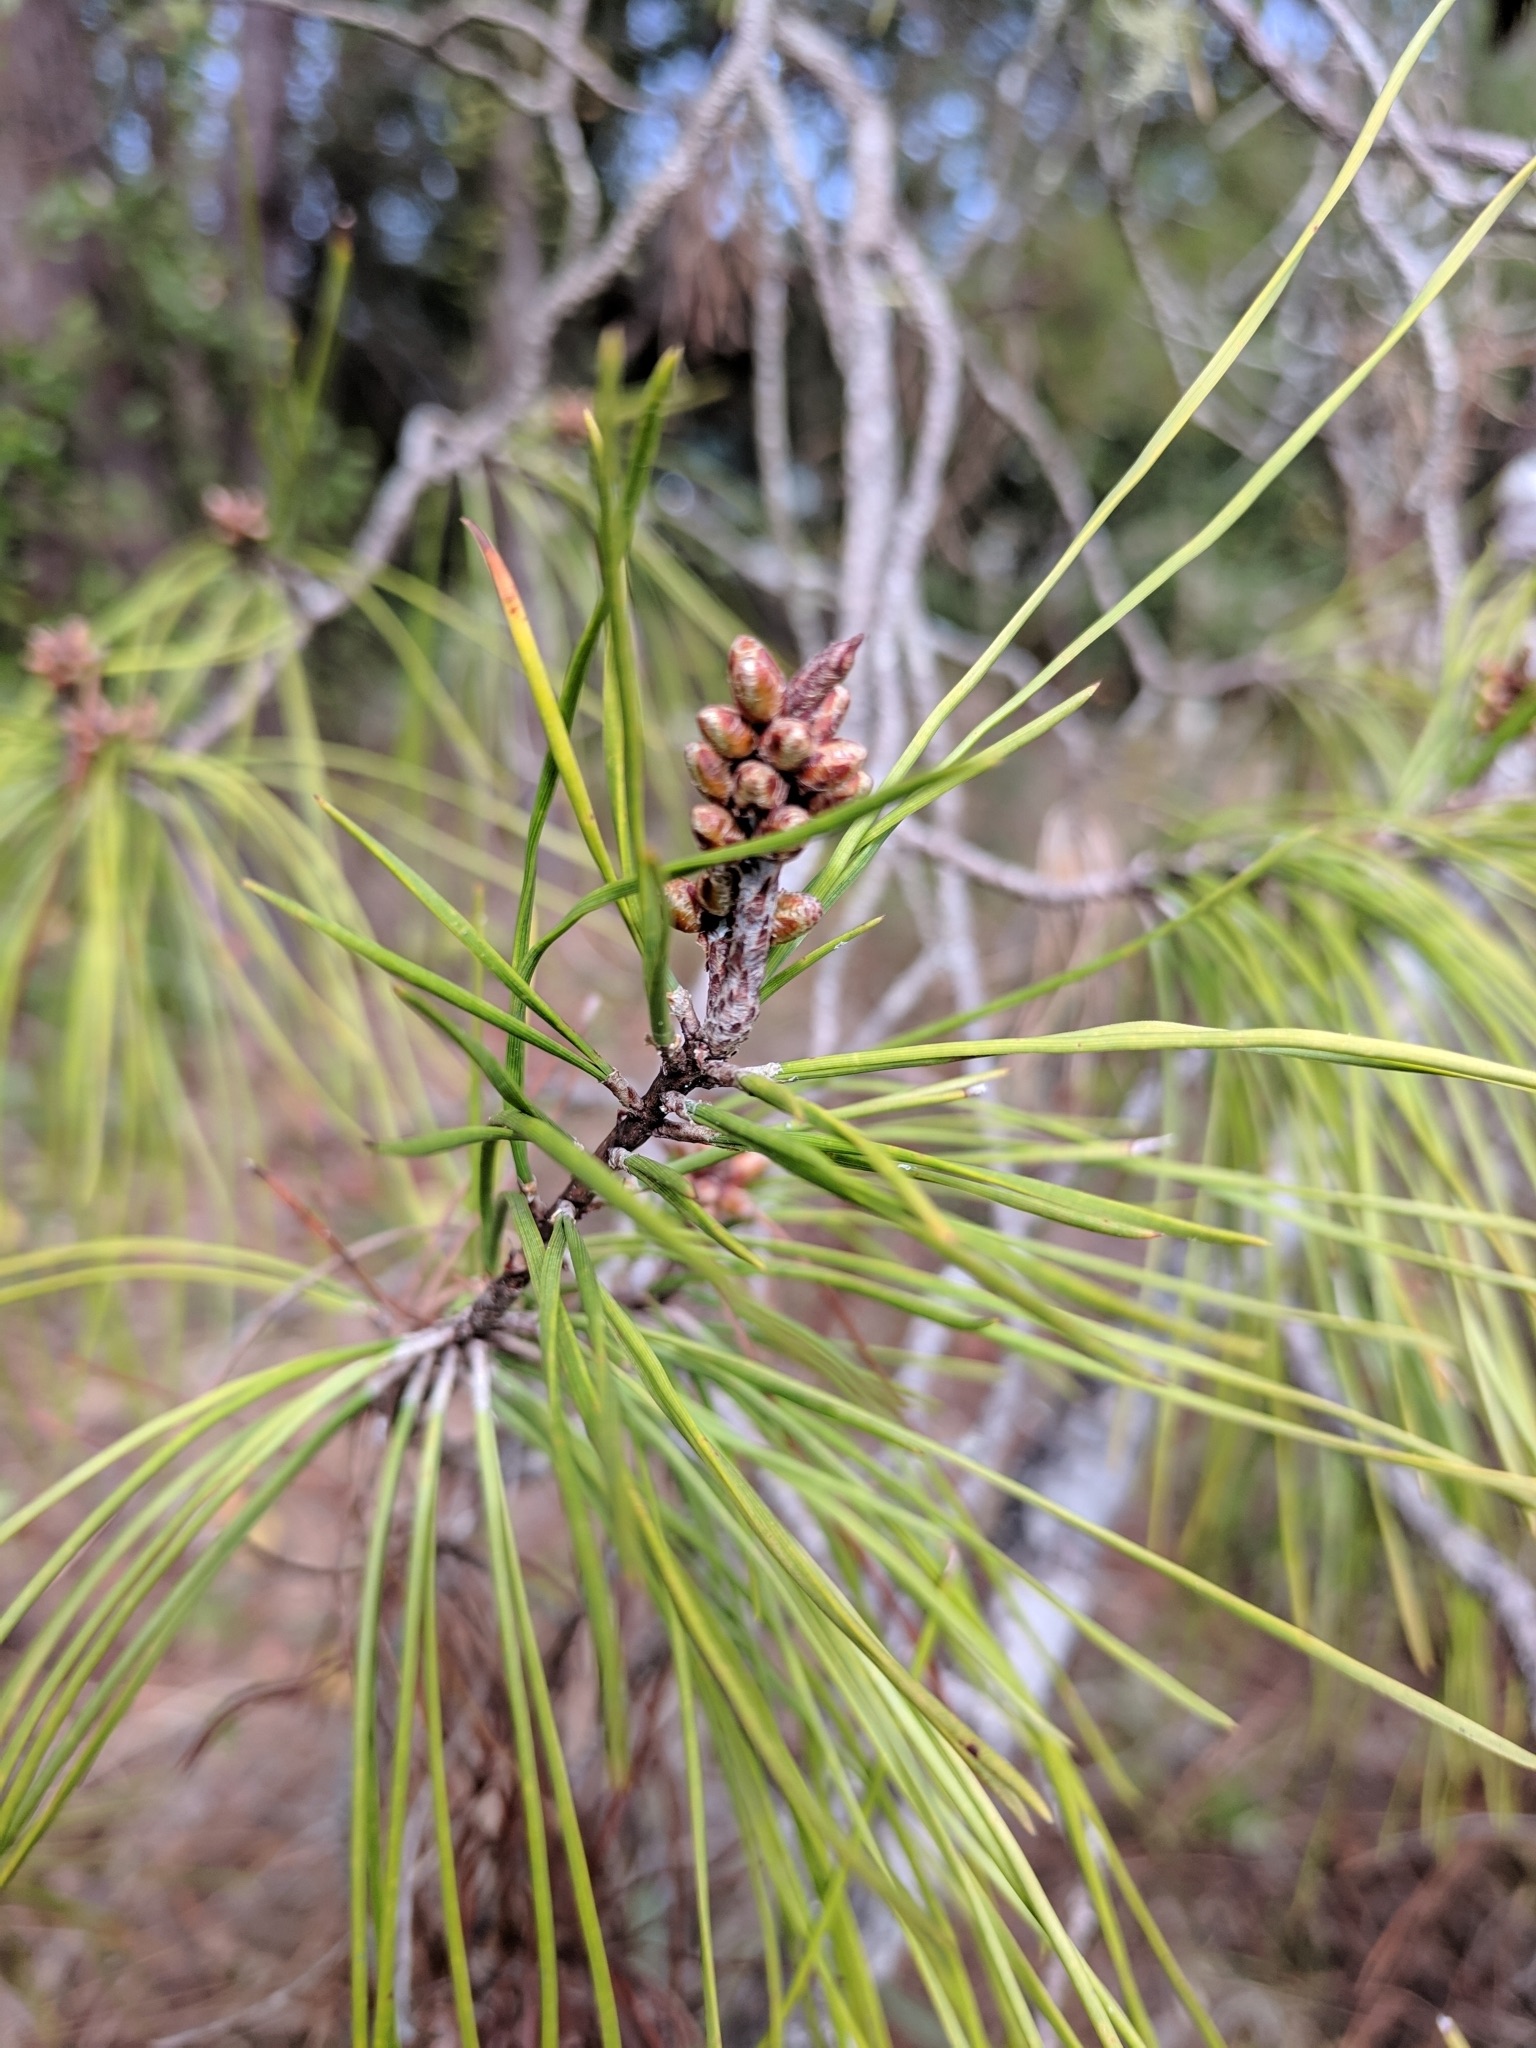 The Scientific Name is Pinus clausa. You will likely hear them called Sand Pine. This picture shows the The yellow-green needles are 2 per fascicle with twisted margins that are finely serrated.  of Pinus clausa